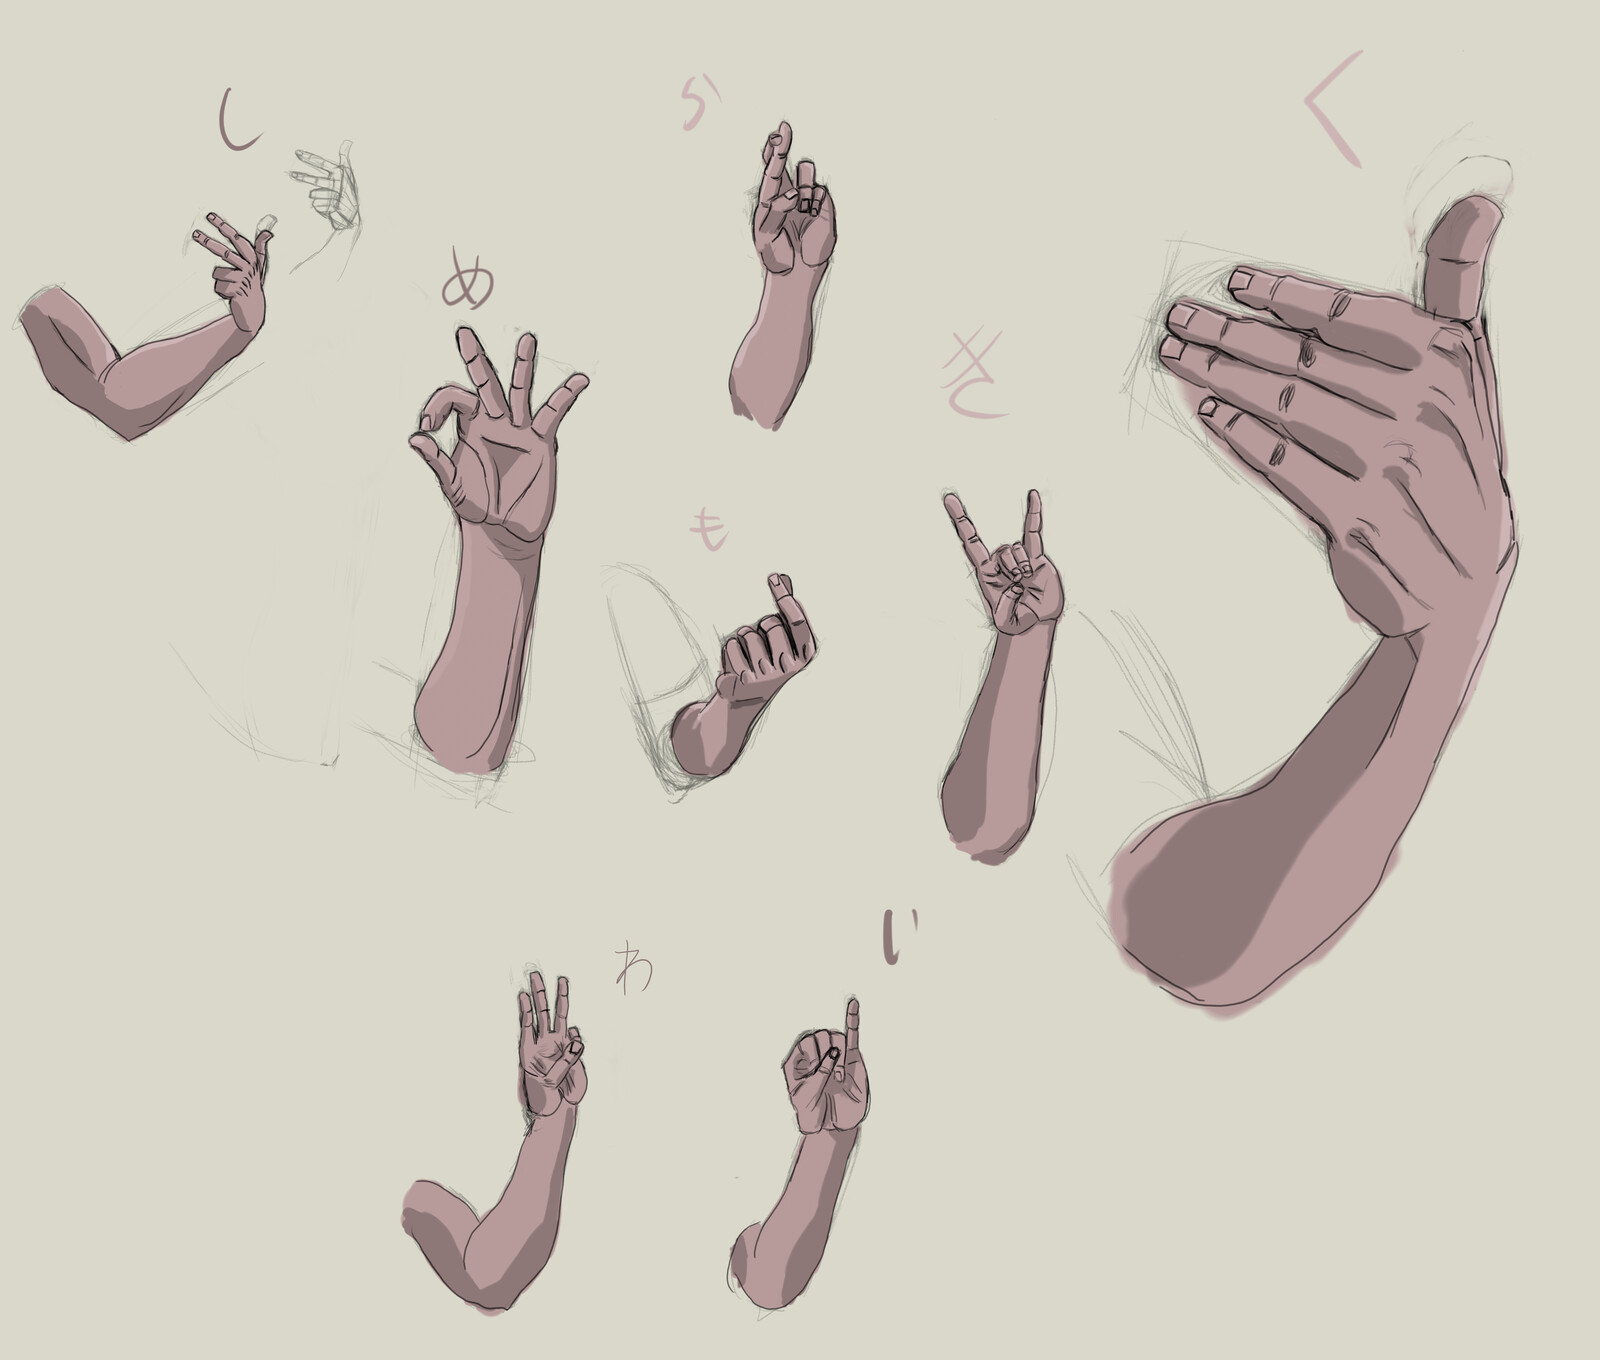 A hand study using signs from Japanese sign language. Note: the gestures are mirrored.